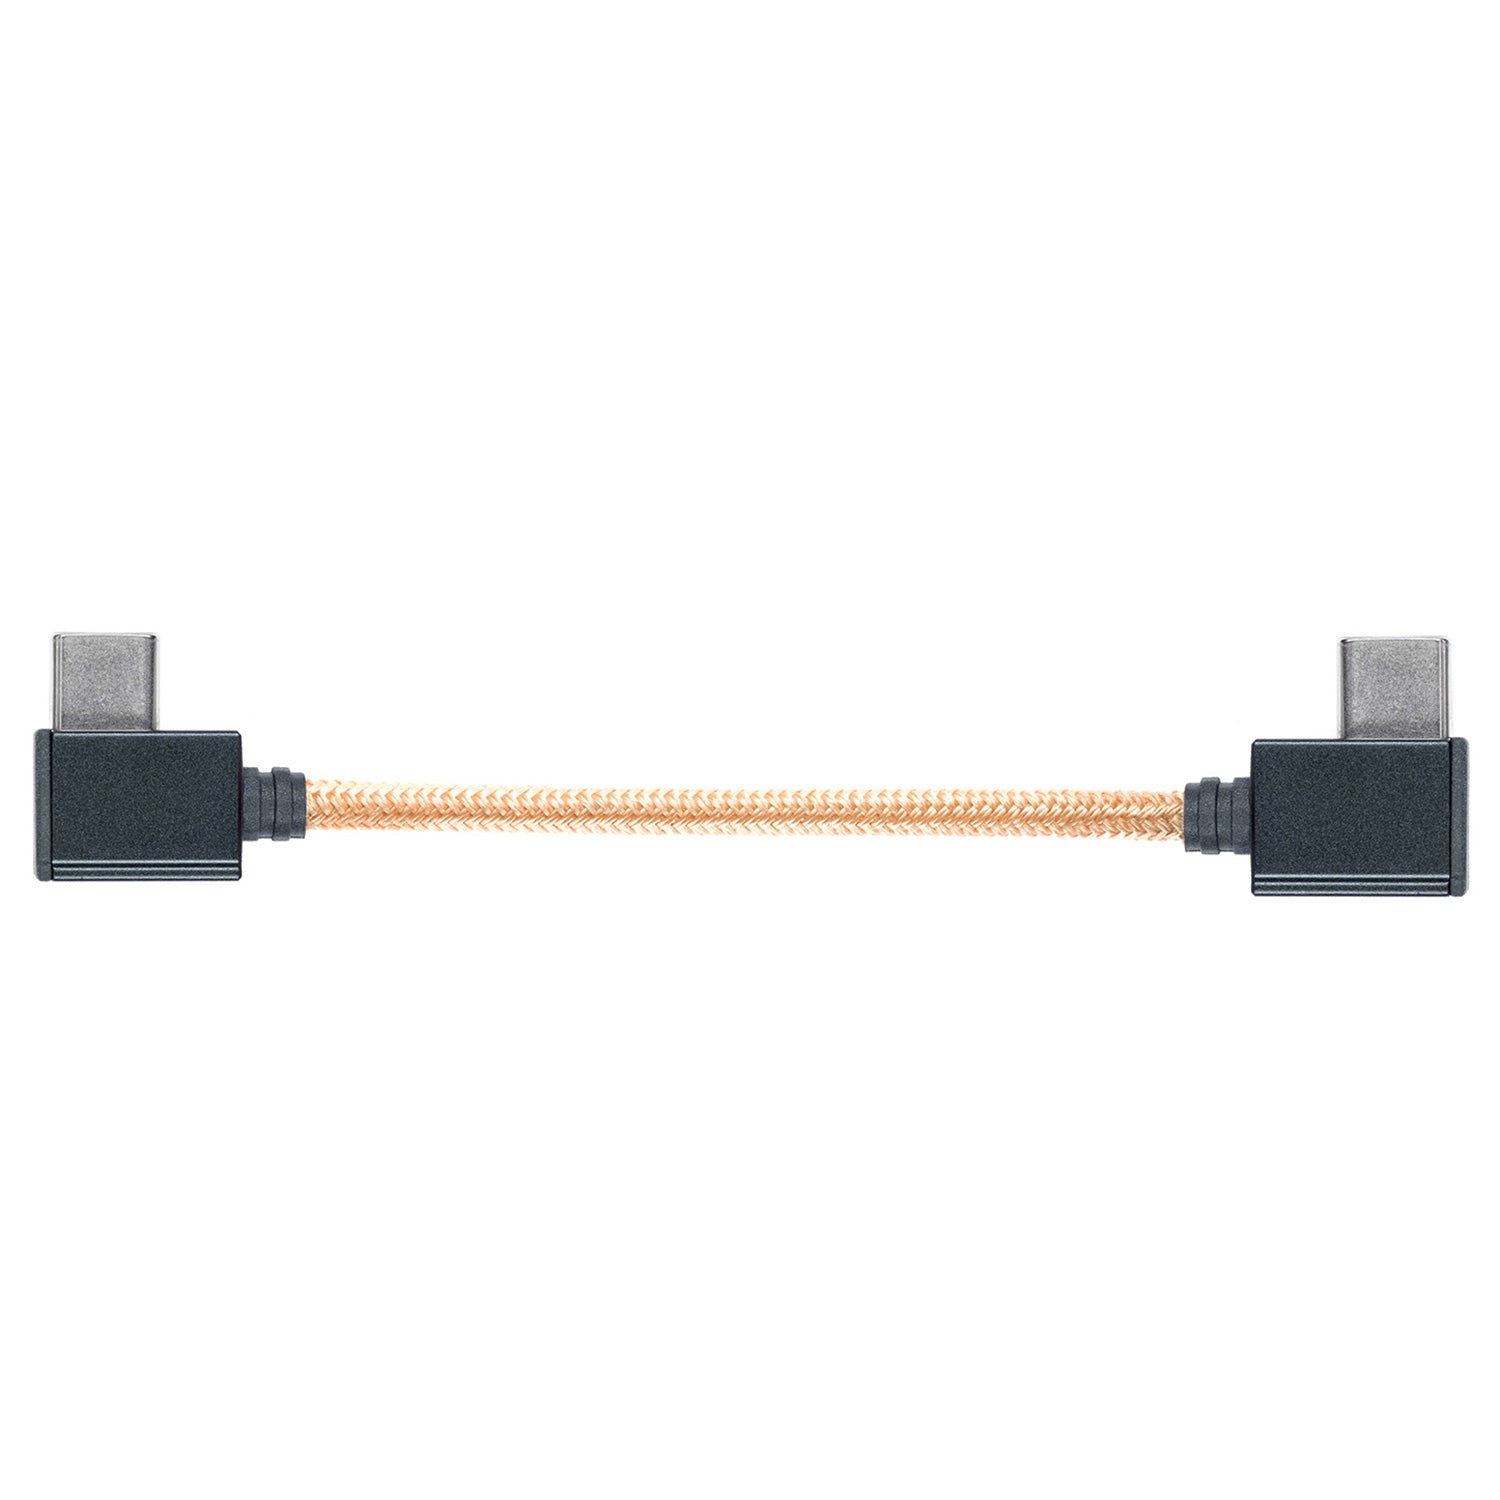 iFi Audio 90-Degree Type-C On-the-Go (OTG) Cable